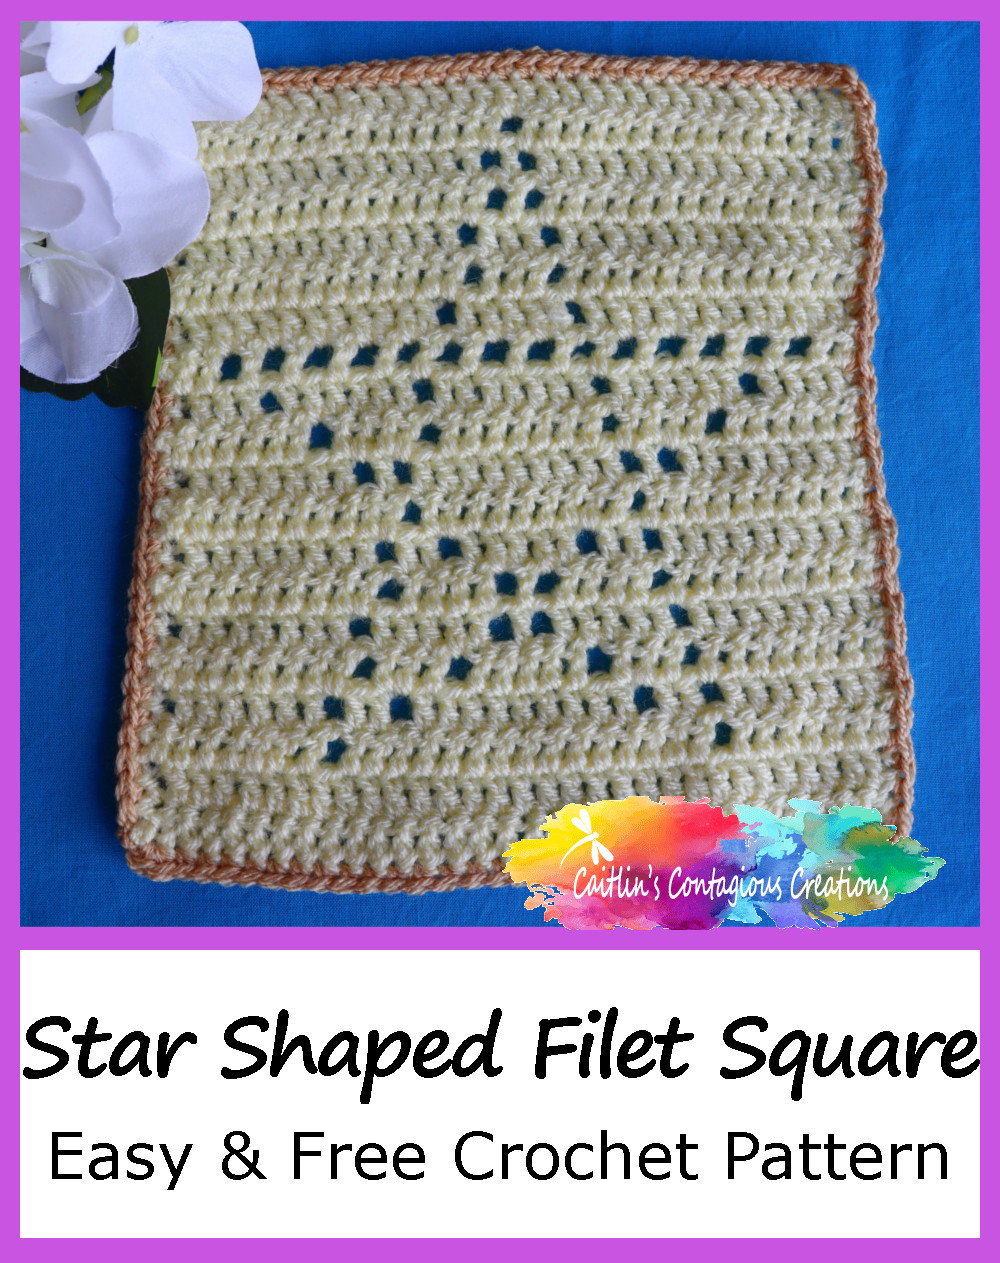 Fun Star Shape Solid Filet Crochet Pattern makes a square that is perfect for a dishcloth or blanket piece.